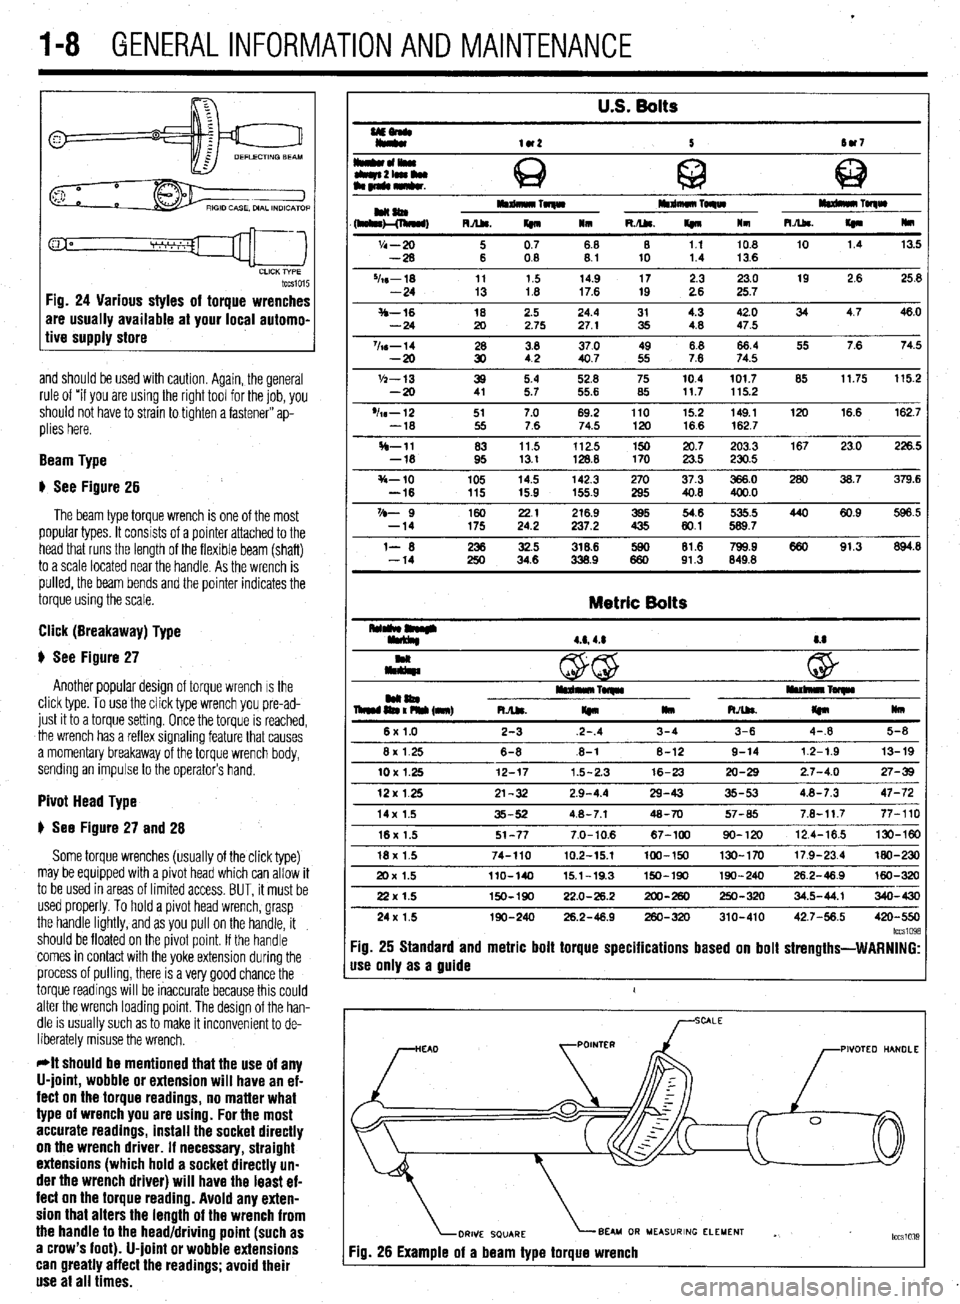 MITSUBISHI DIAMANTE 1900  Repair Manual . 
l-8 GENERALINFORMATIONAND MAINTENANCE 
tccsio15 Fig. 24 Various styles of torque wrenches 
are usually available at your local automo- 
tive supply store 
and should be used with caution. Again, th